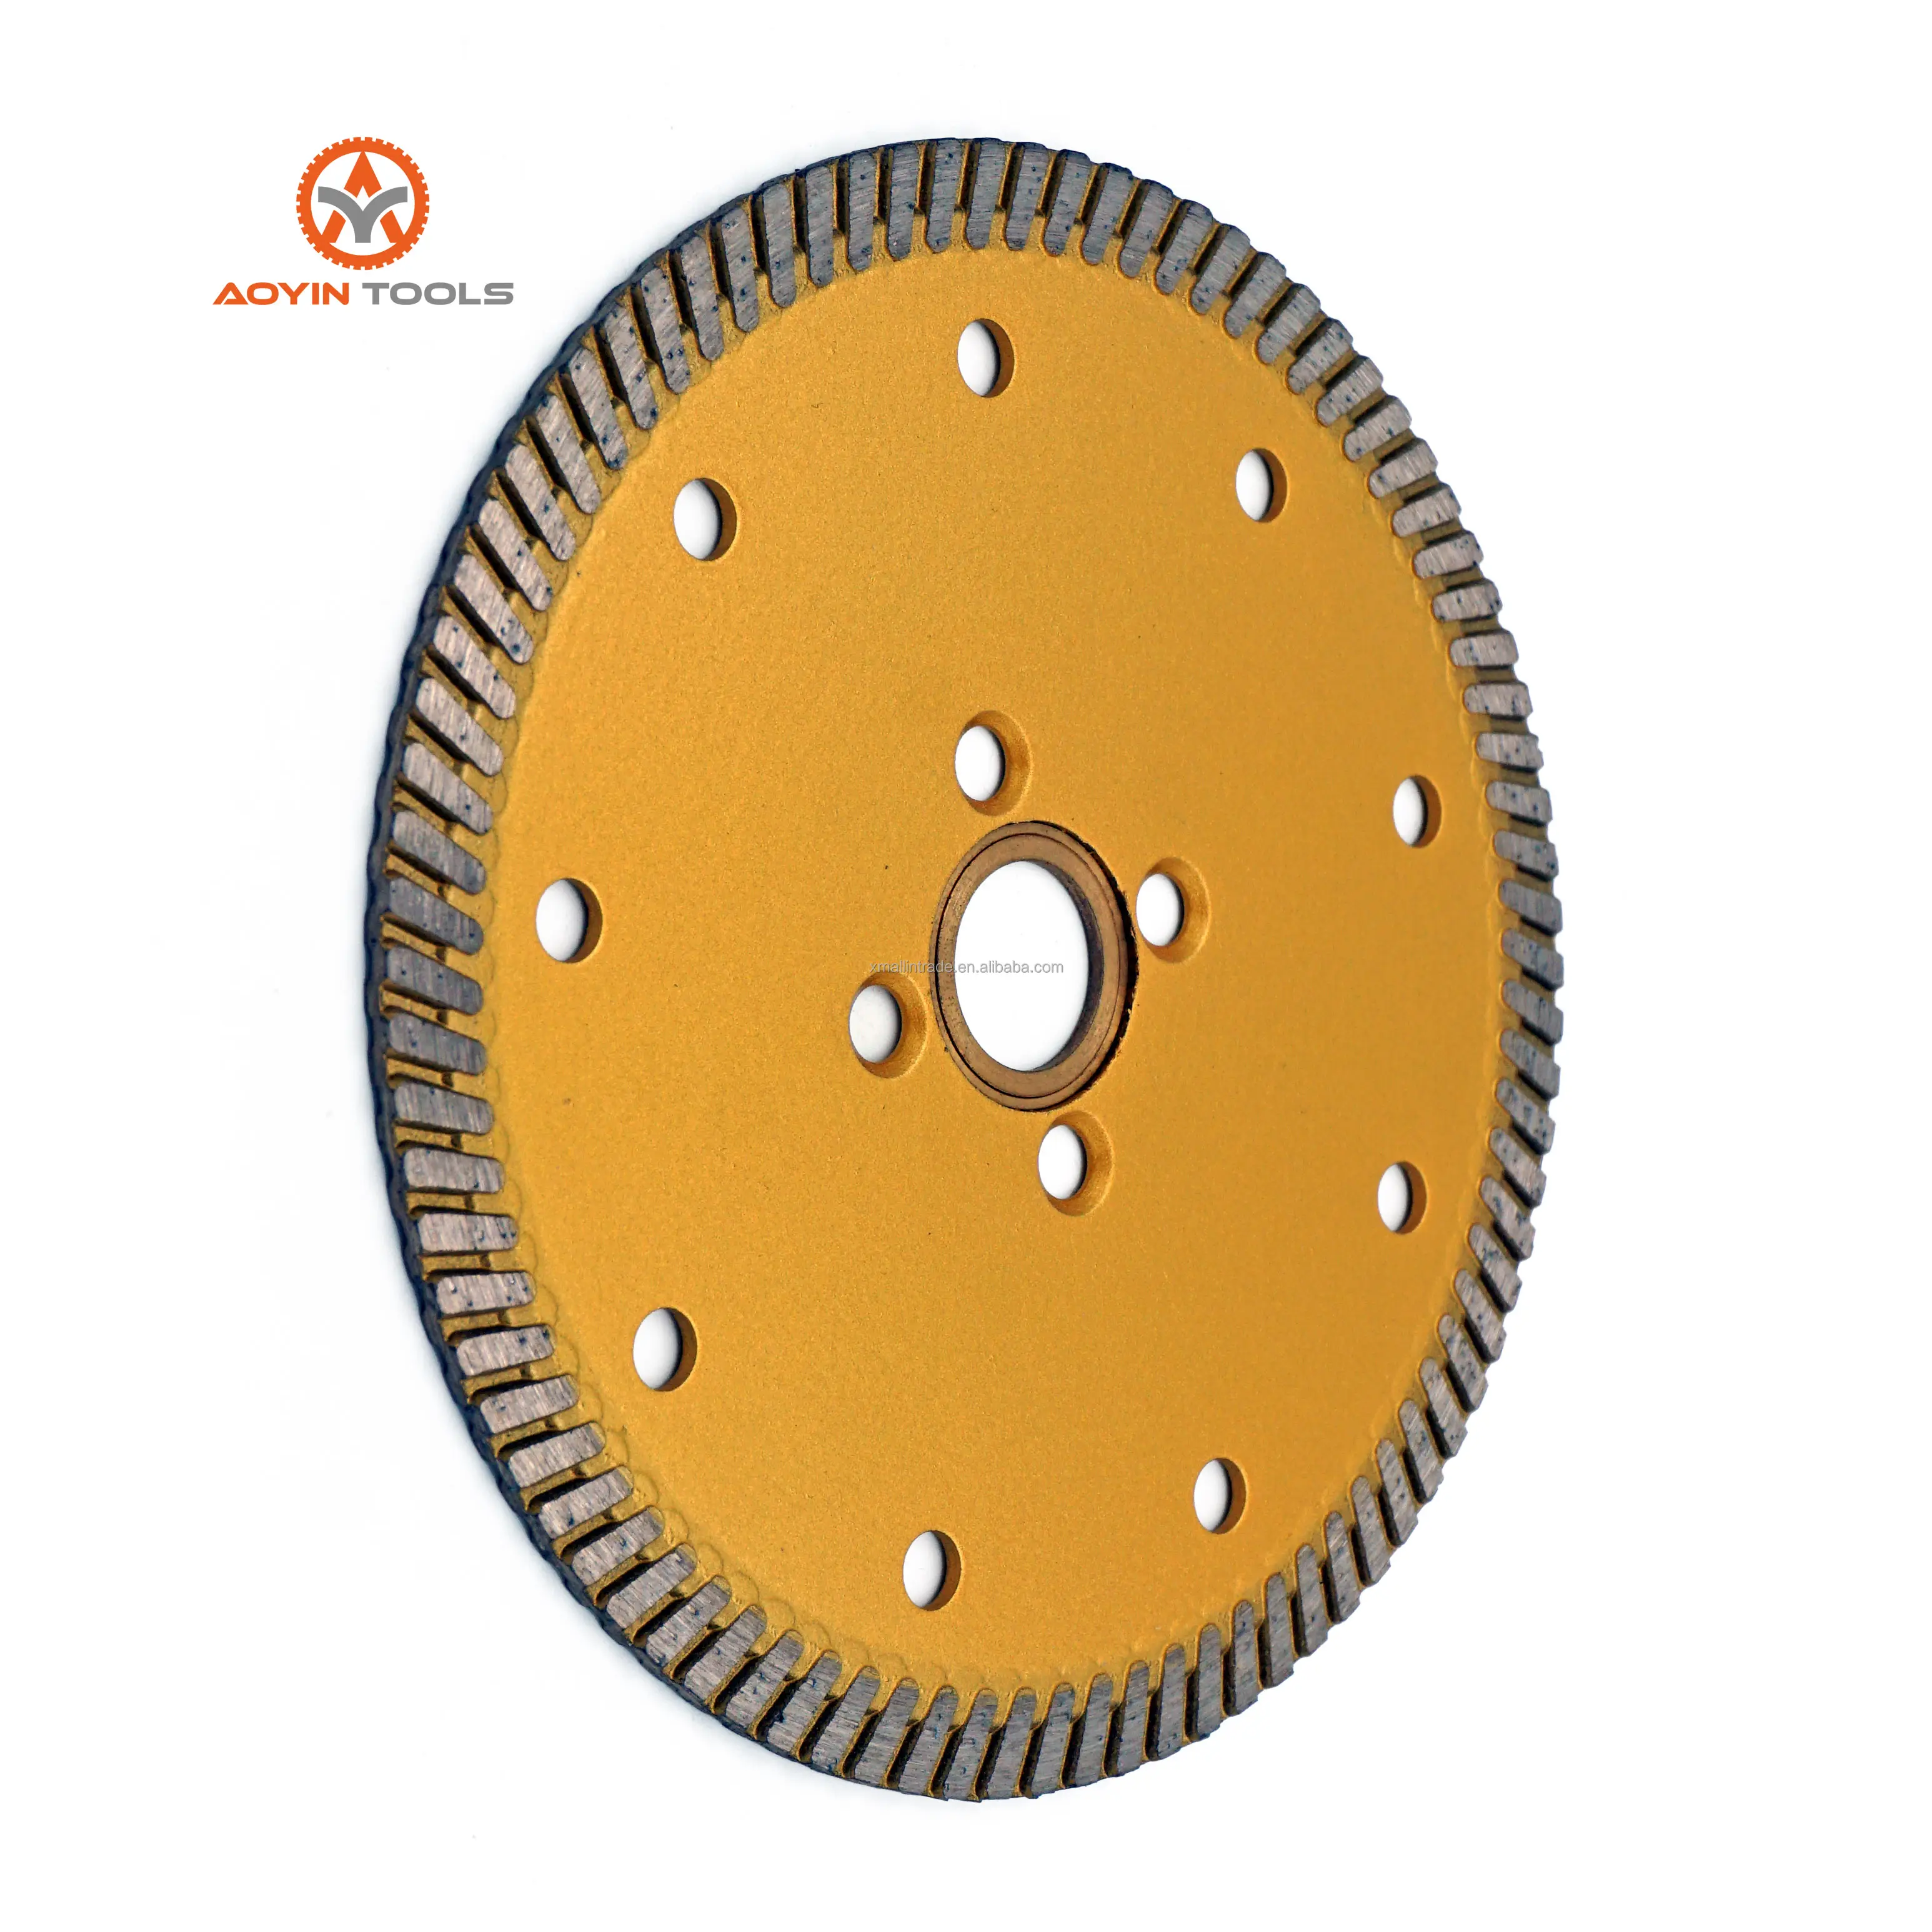 Wholesale Dia inch mm Hot-pressed Diamond Narrow Continuous Super Thin Turbo Saw Blade Use For Granite Marble Cutting